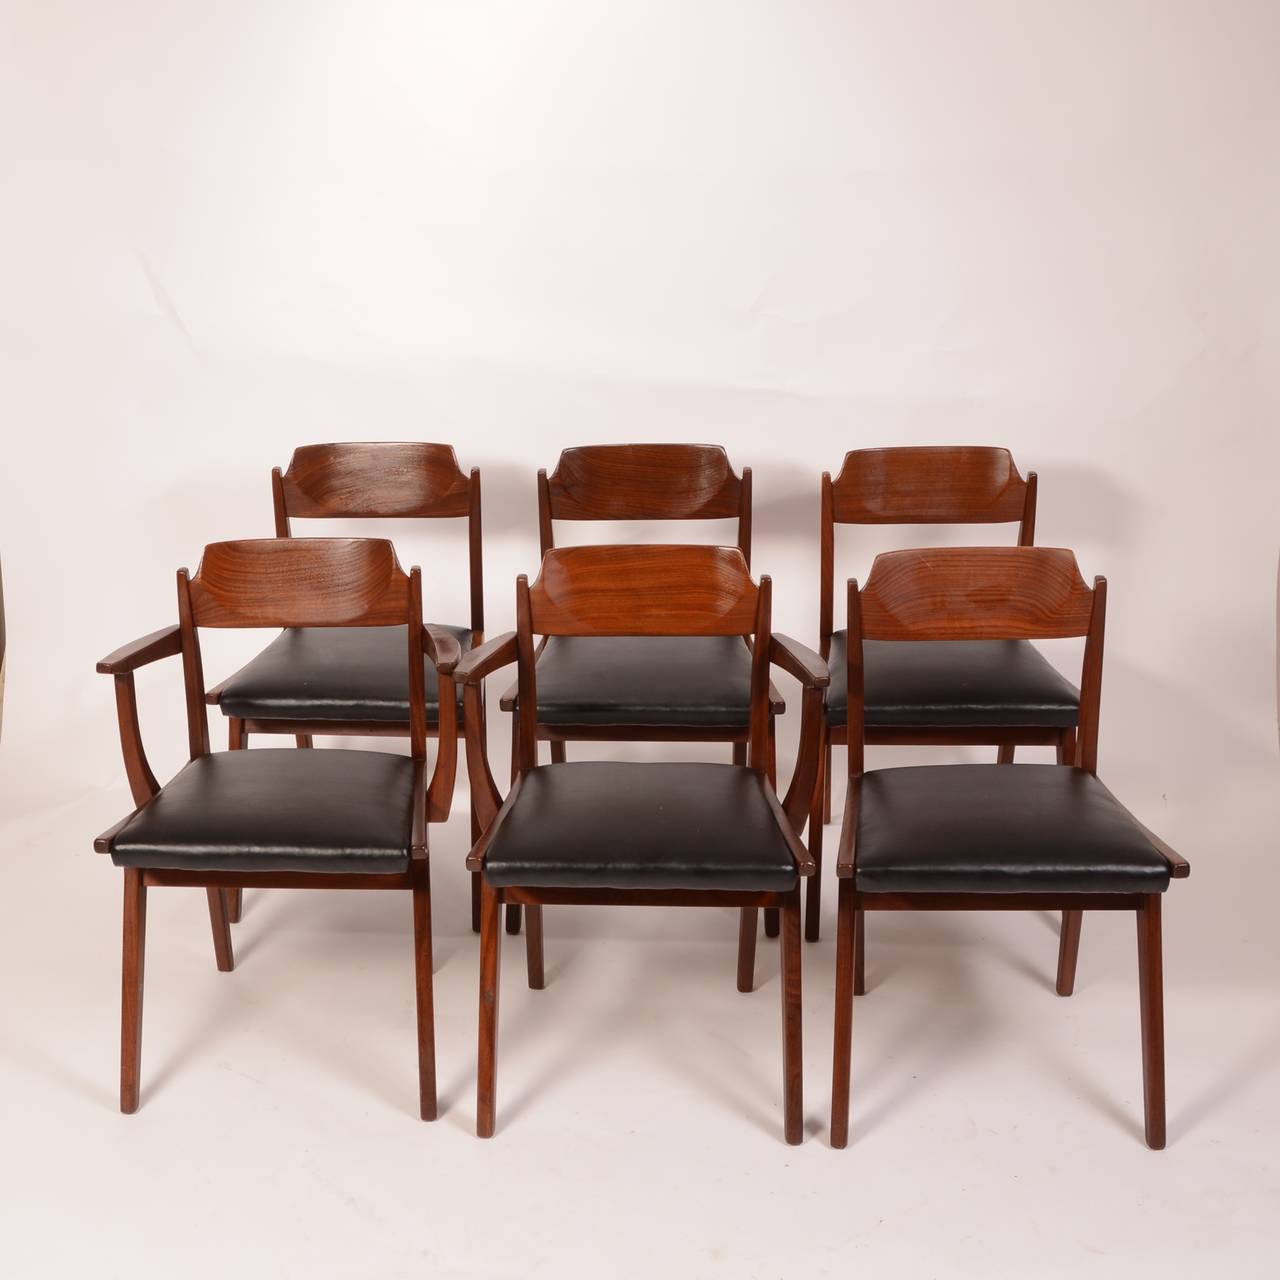 A set of 6 dining chairs designed by Jan Kuypers for Imperial.   The Chairs are in excellent condition.  The set includes two captain chairs. New upholstery and cushions.  

Local pick up available at our Los Angeles showroom 
